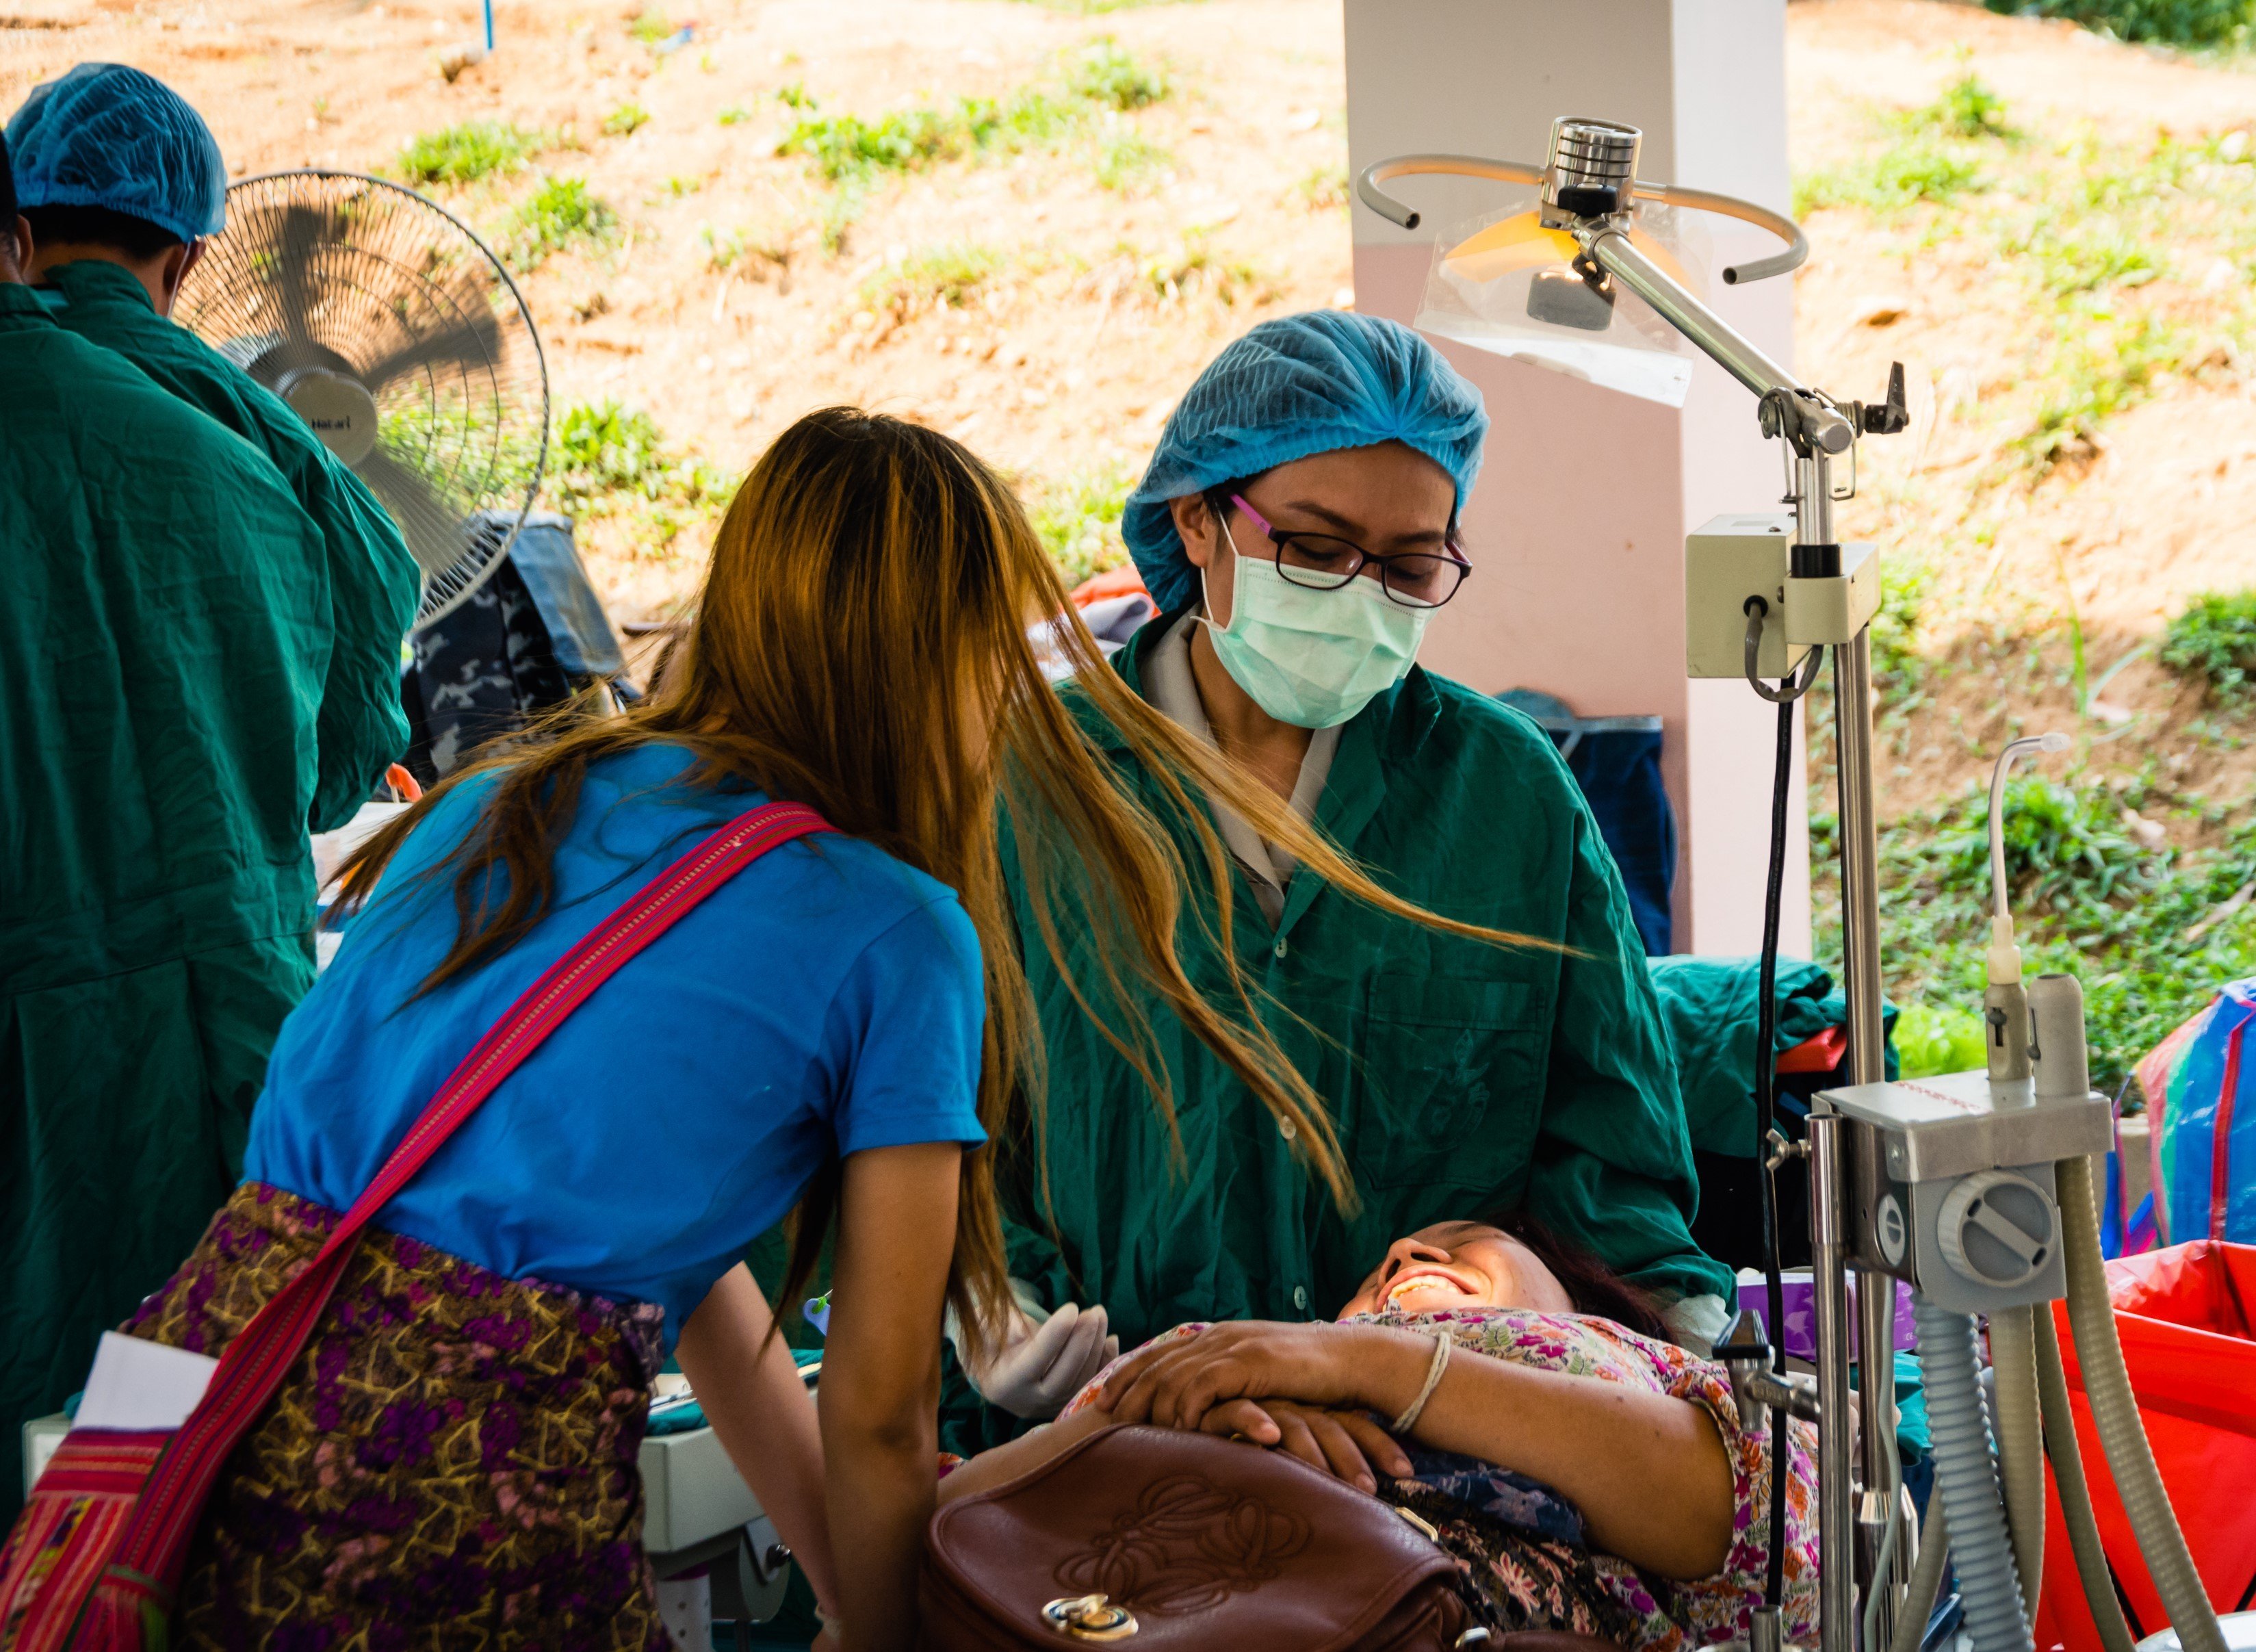 How to Volunteer in a Hospital What You Need to Know About Medical Volunteering Abroad